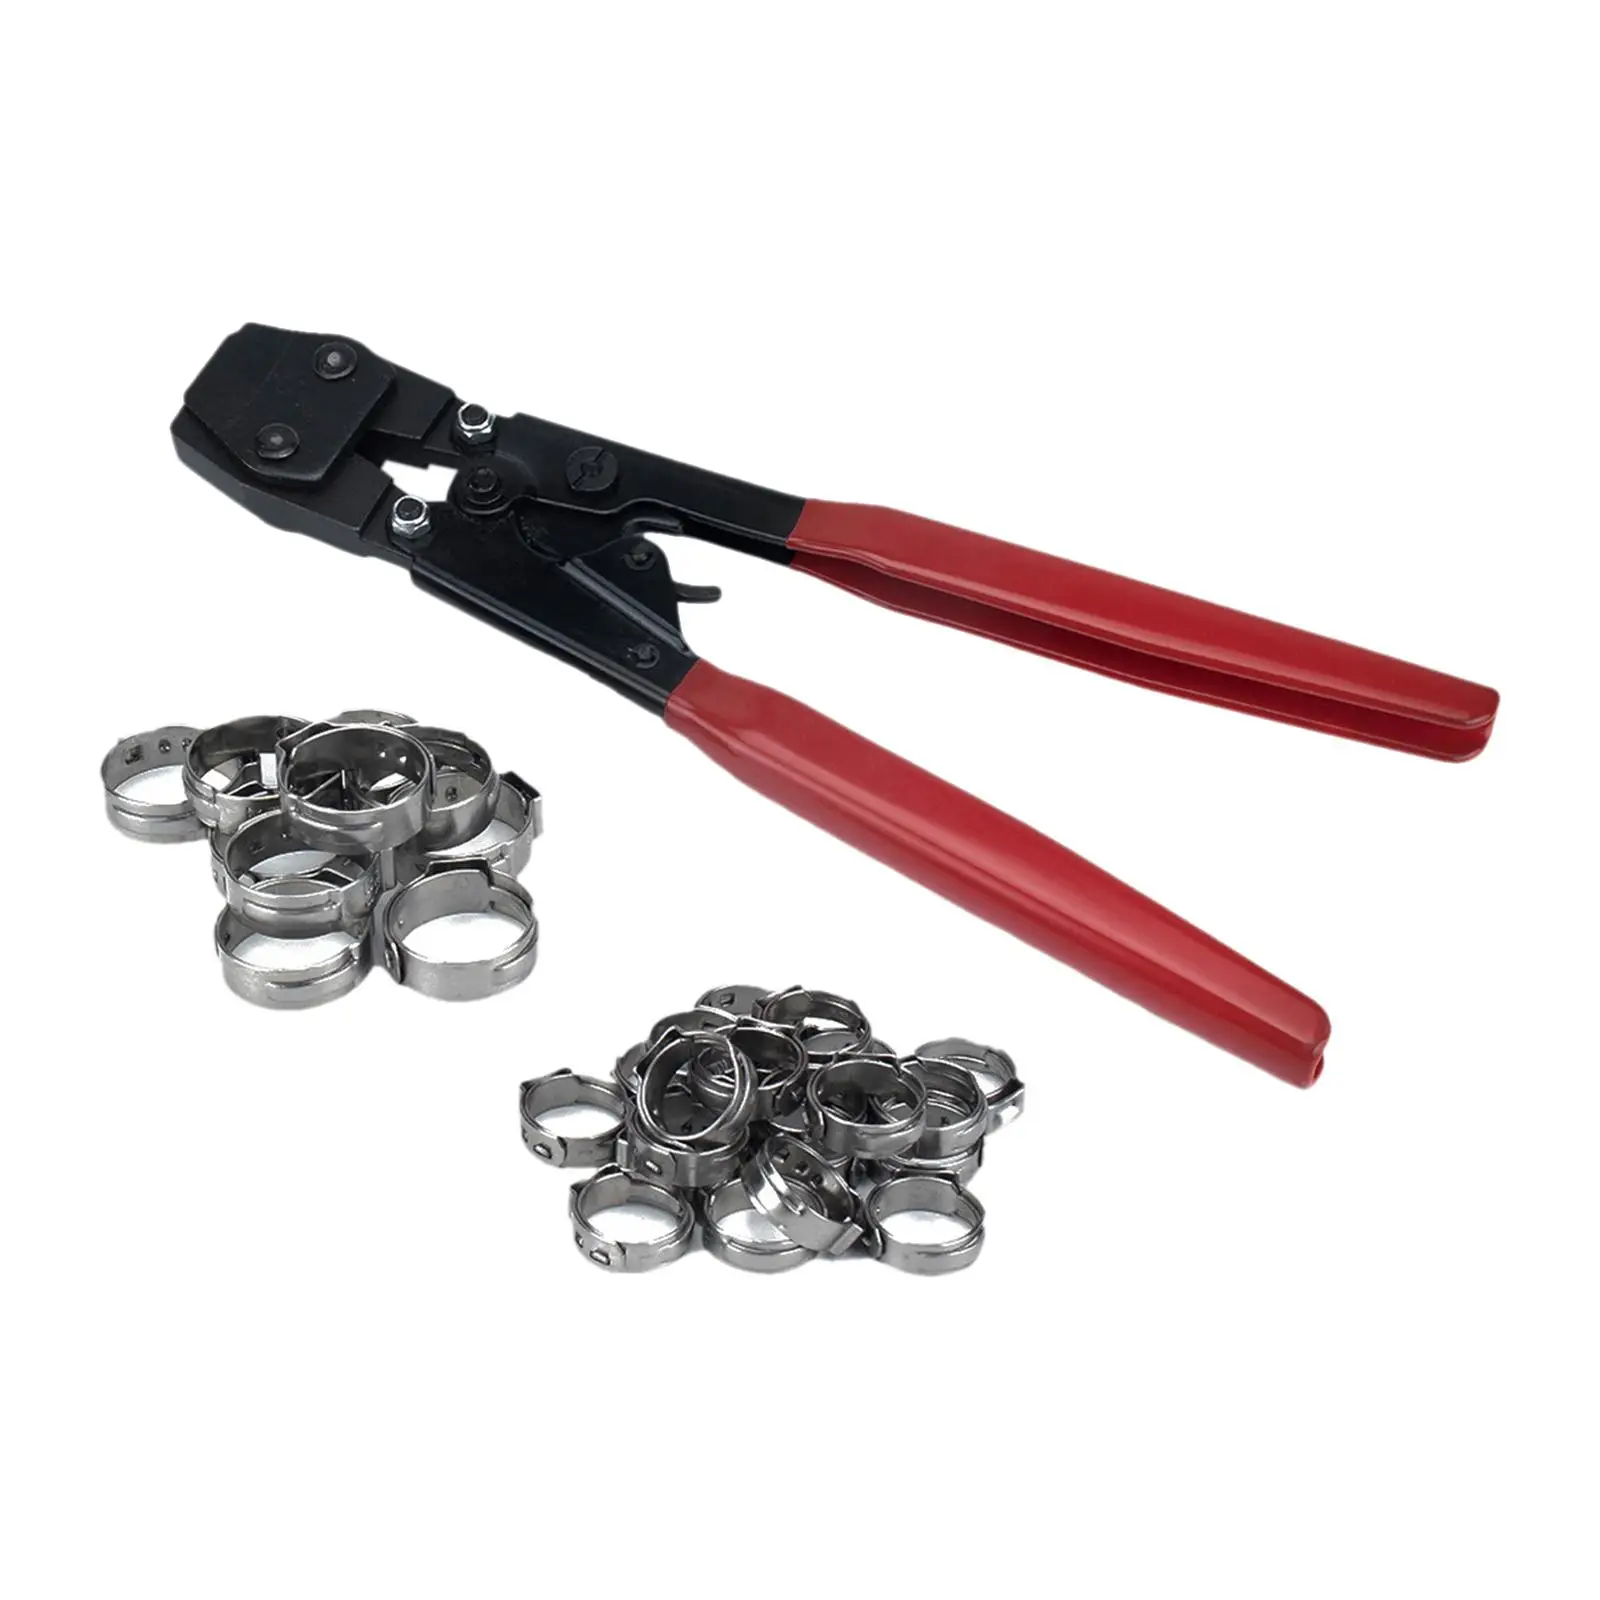 

Universal Pex Clamp Cinch Tool with Clamps Set Clamp Pliers Pex Crimper Crimping Pliers